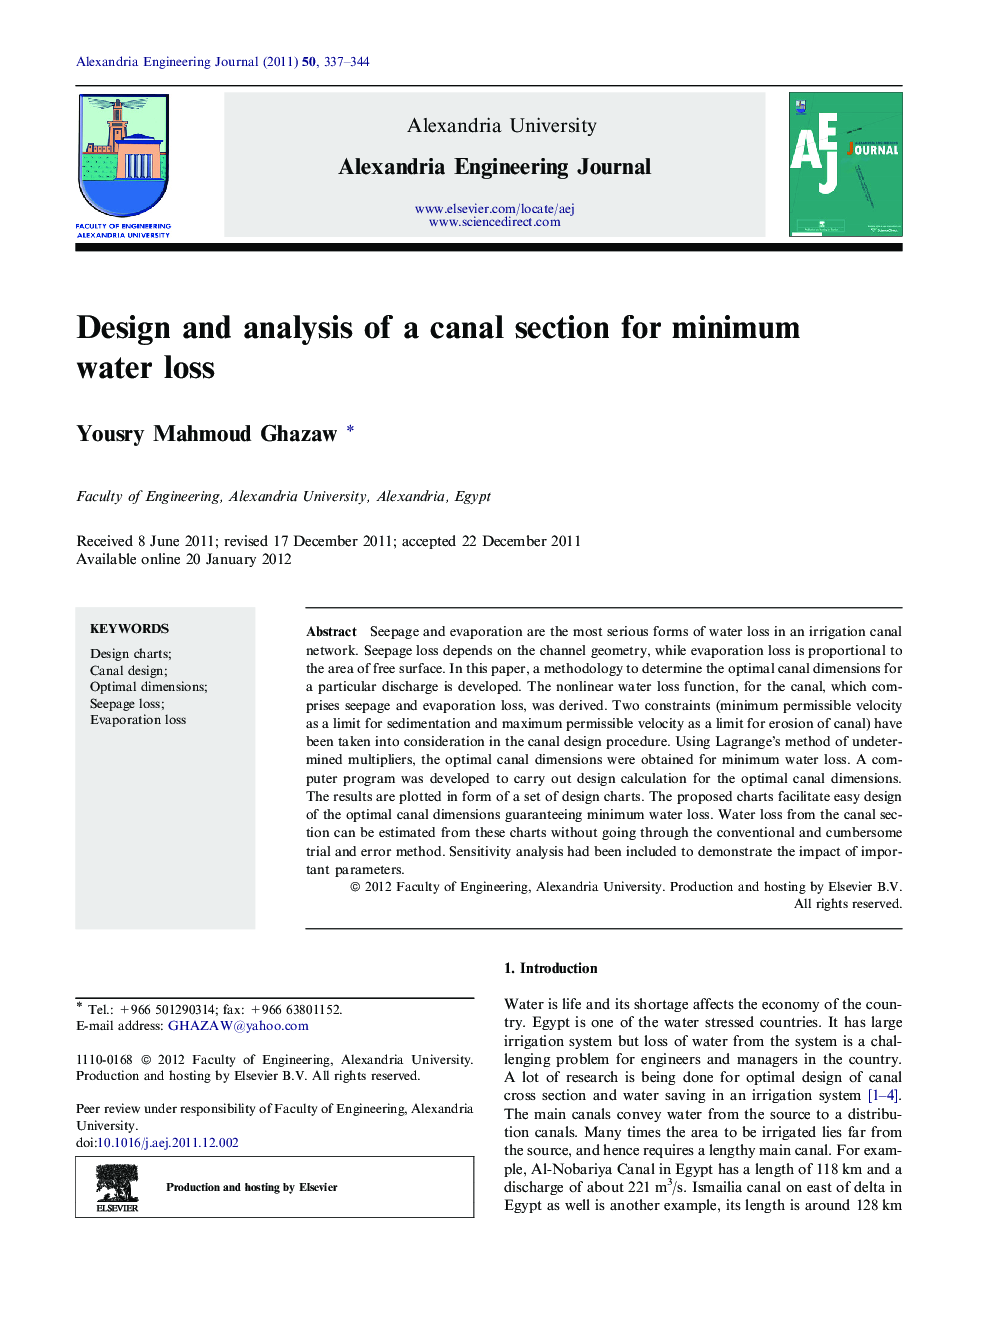 Design and analysis of a canal section for minimum water loss